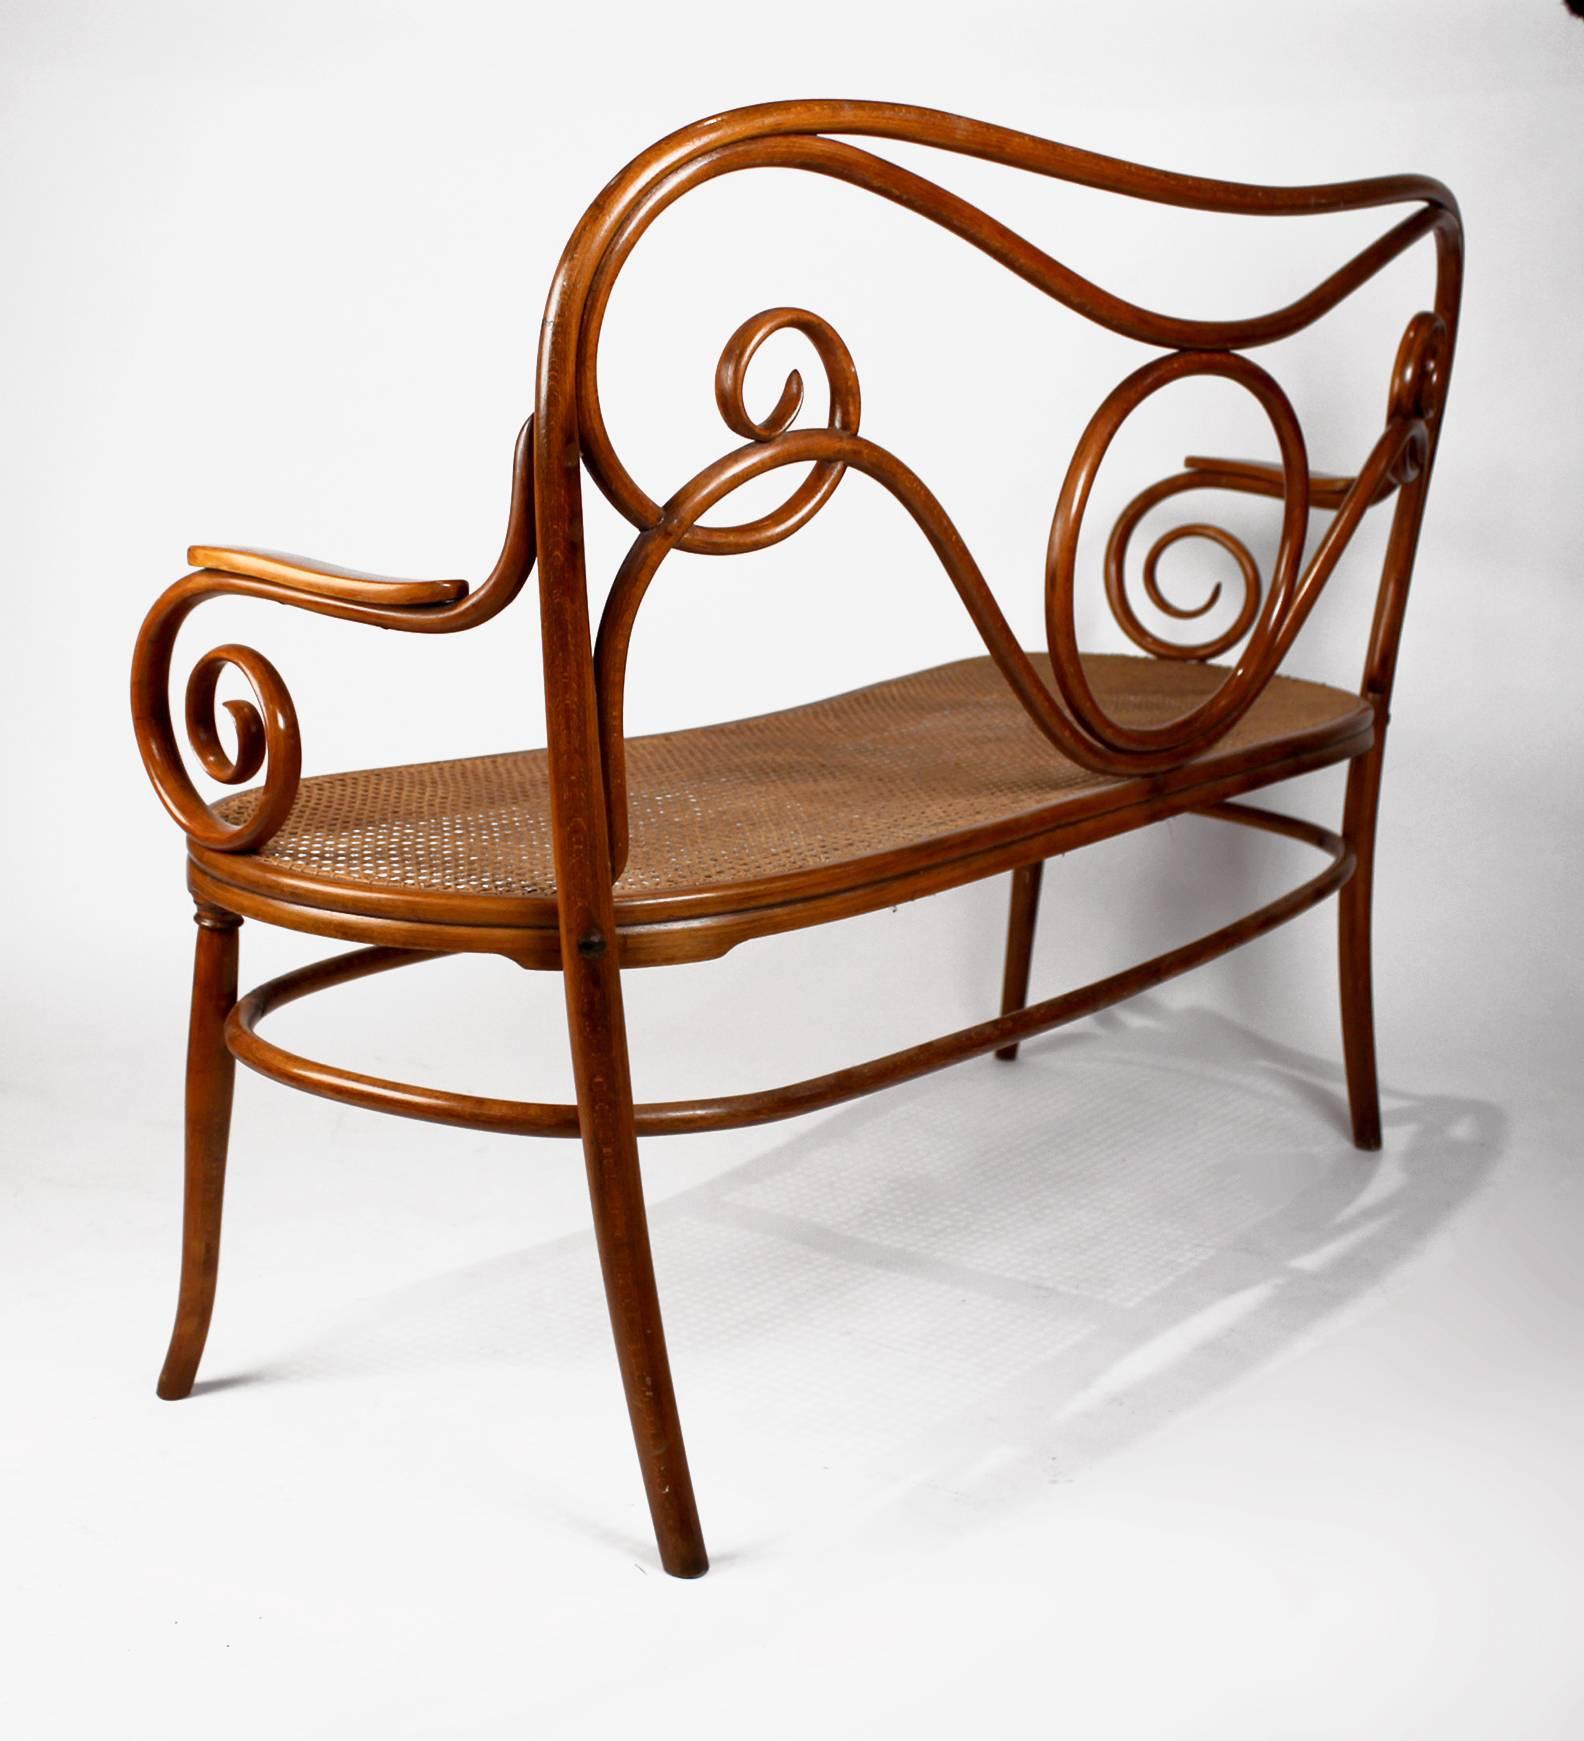 Vienna Secession Gebruder Thonet Viennese Secessionist Bentwood Settee Designed by August Thonet